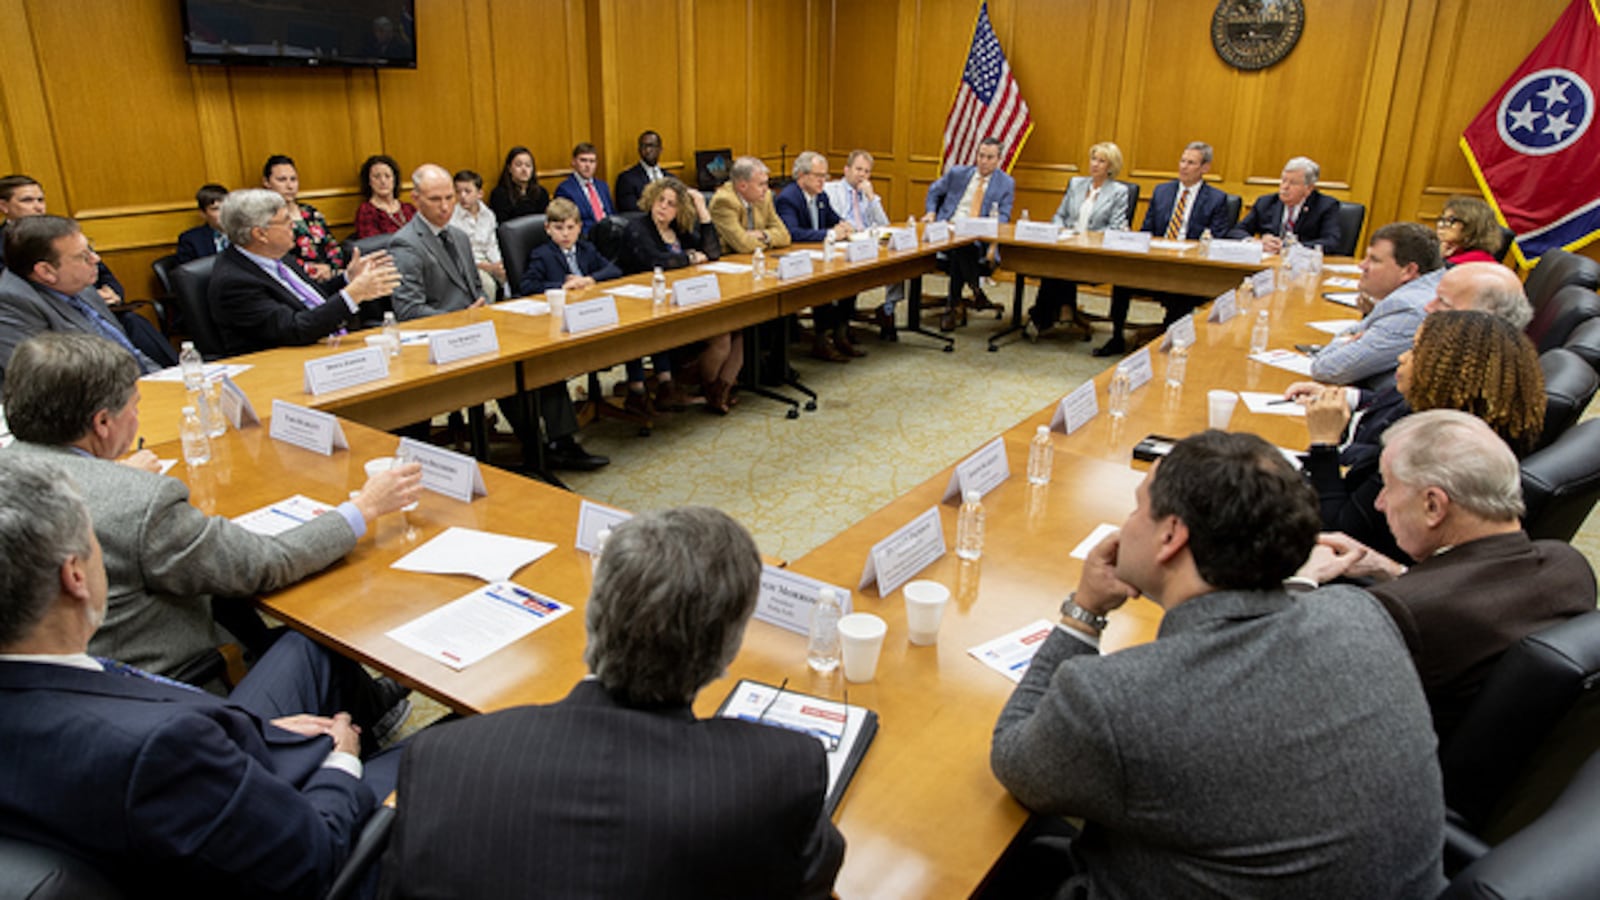 U.S. Secretary of Education Betsy DeVos and Gov. Bill Lee lead a roundtable discussion on school choice Monday at the state Capitol in Nashville. (Photo courtesy of the U.S. education department)